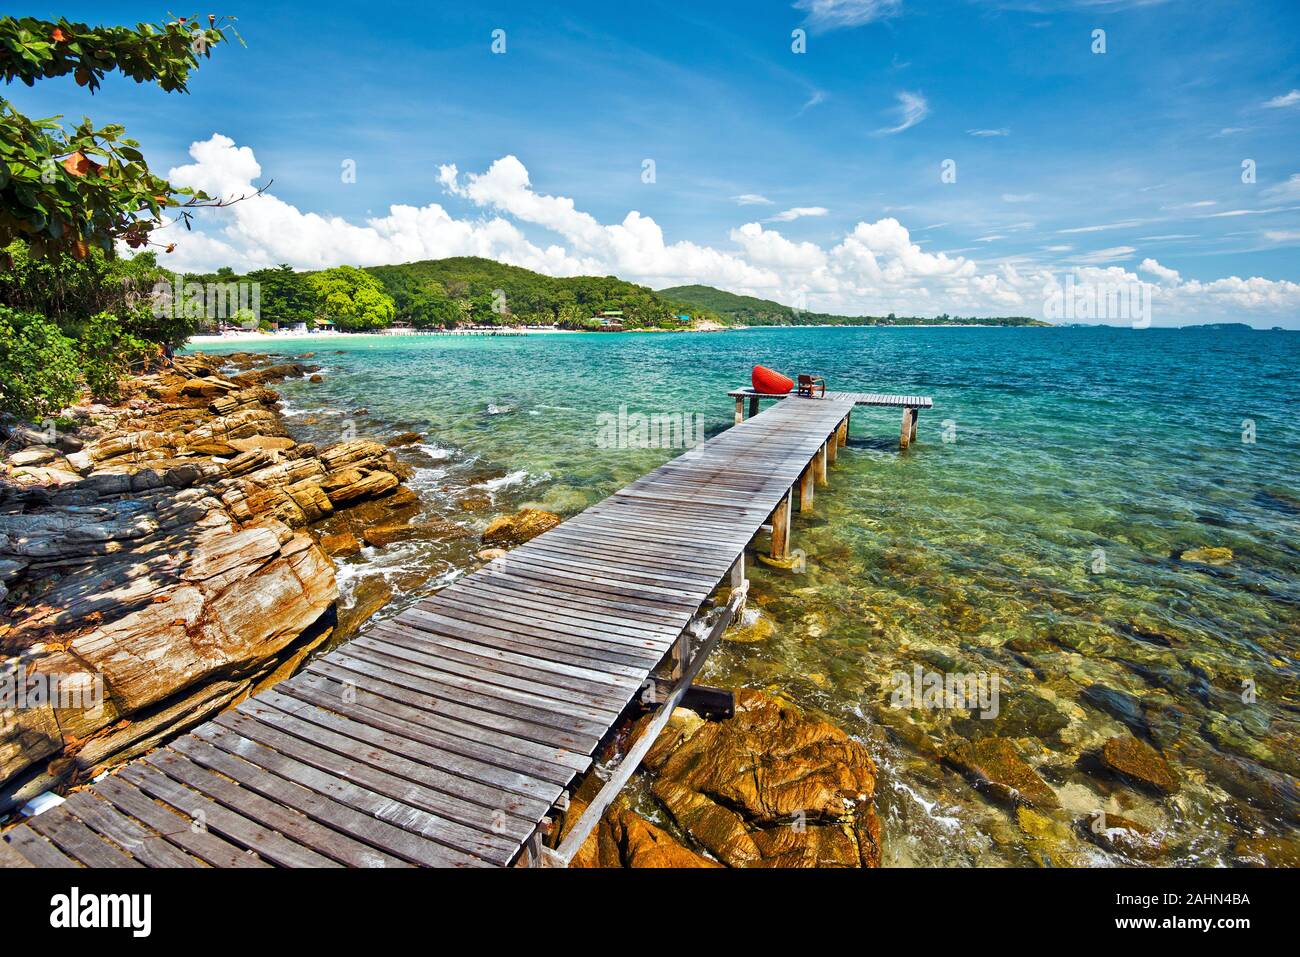 Wooden jetty in tropical beach, textured stones of the coastline is at foreground, and eastern coastline of Ko Samet island is at background, Thailand Stock Photo